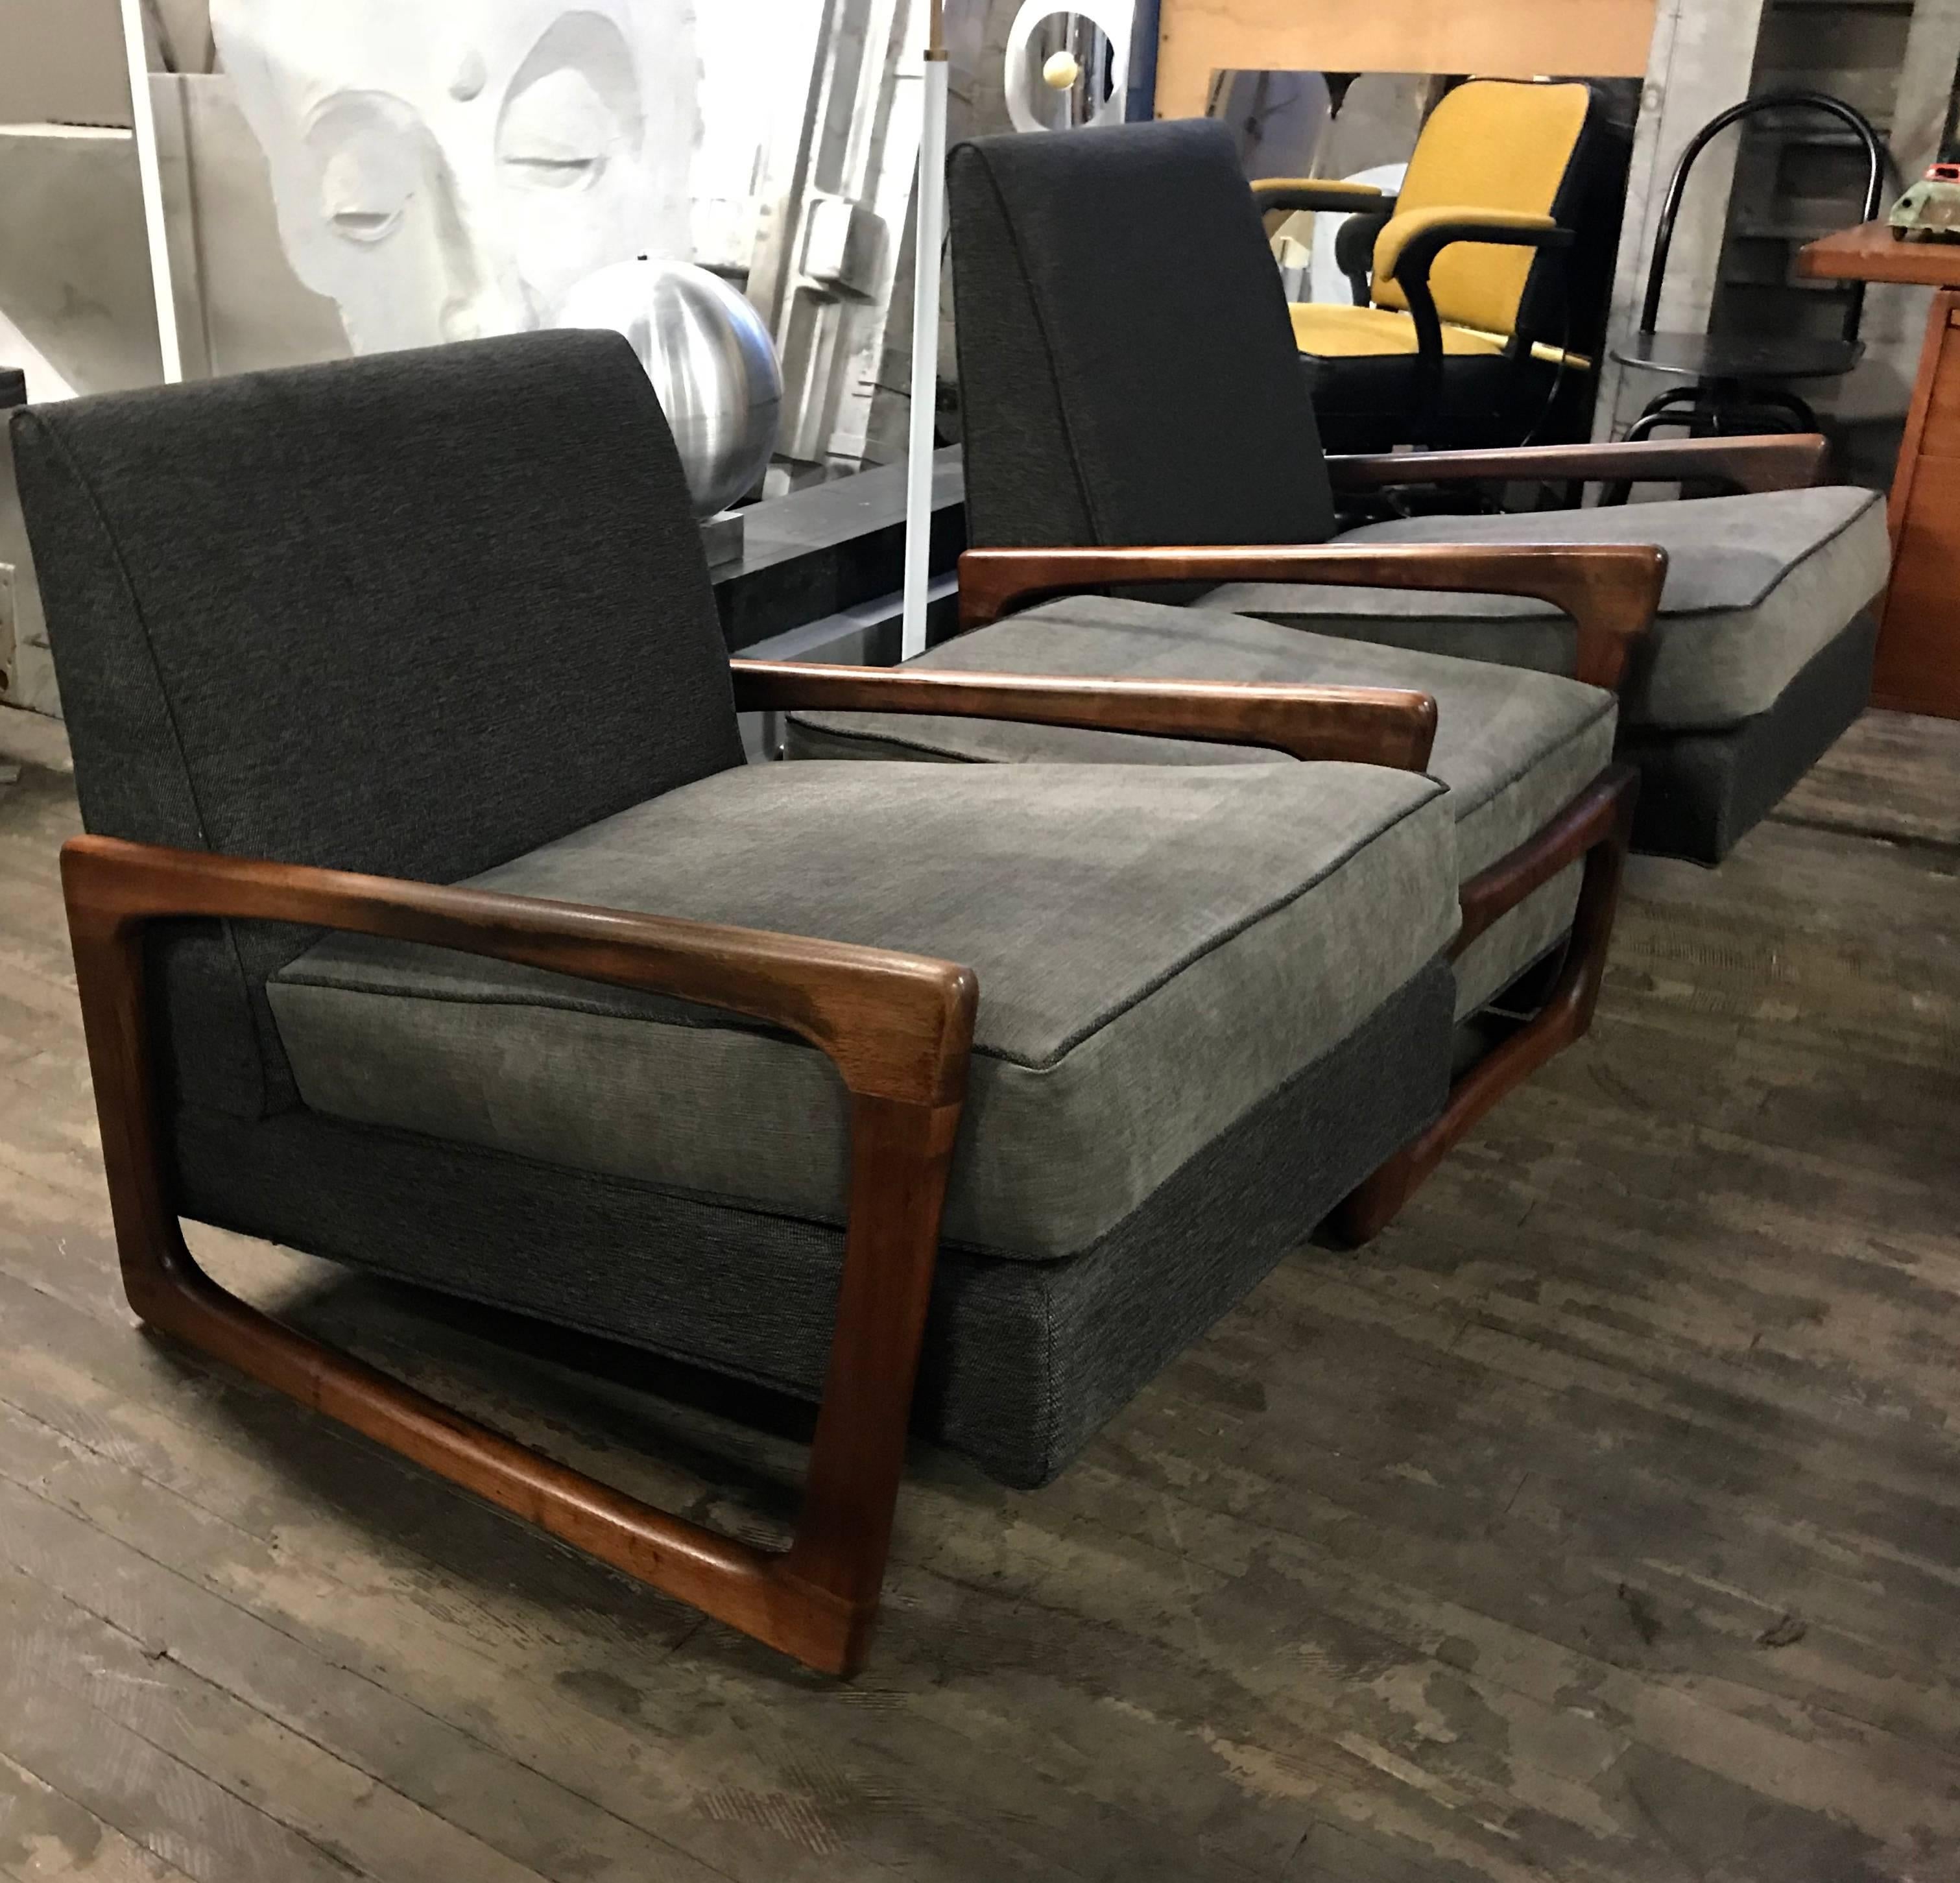 Stunning Classic Modernist Sculptural Lounge Chairs and Ottoman Adrian Pearsall 2